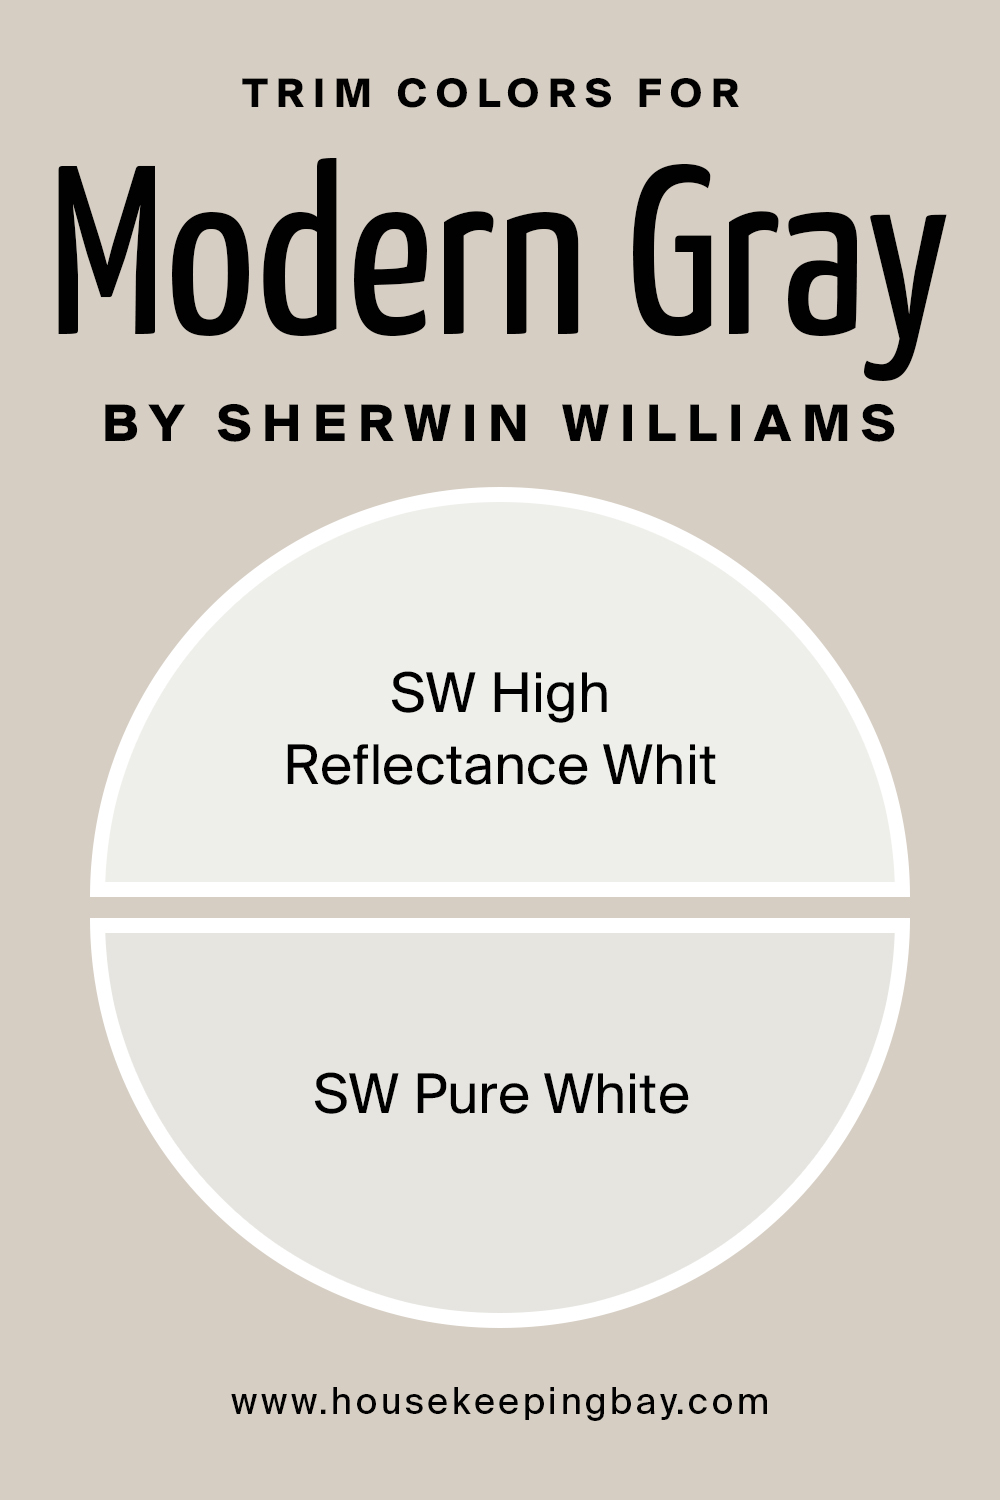 Trim Colors for Modern Gray by Sherwin Williams